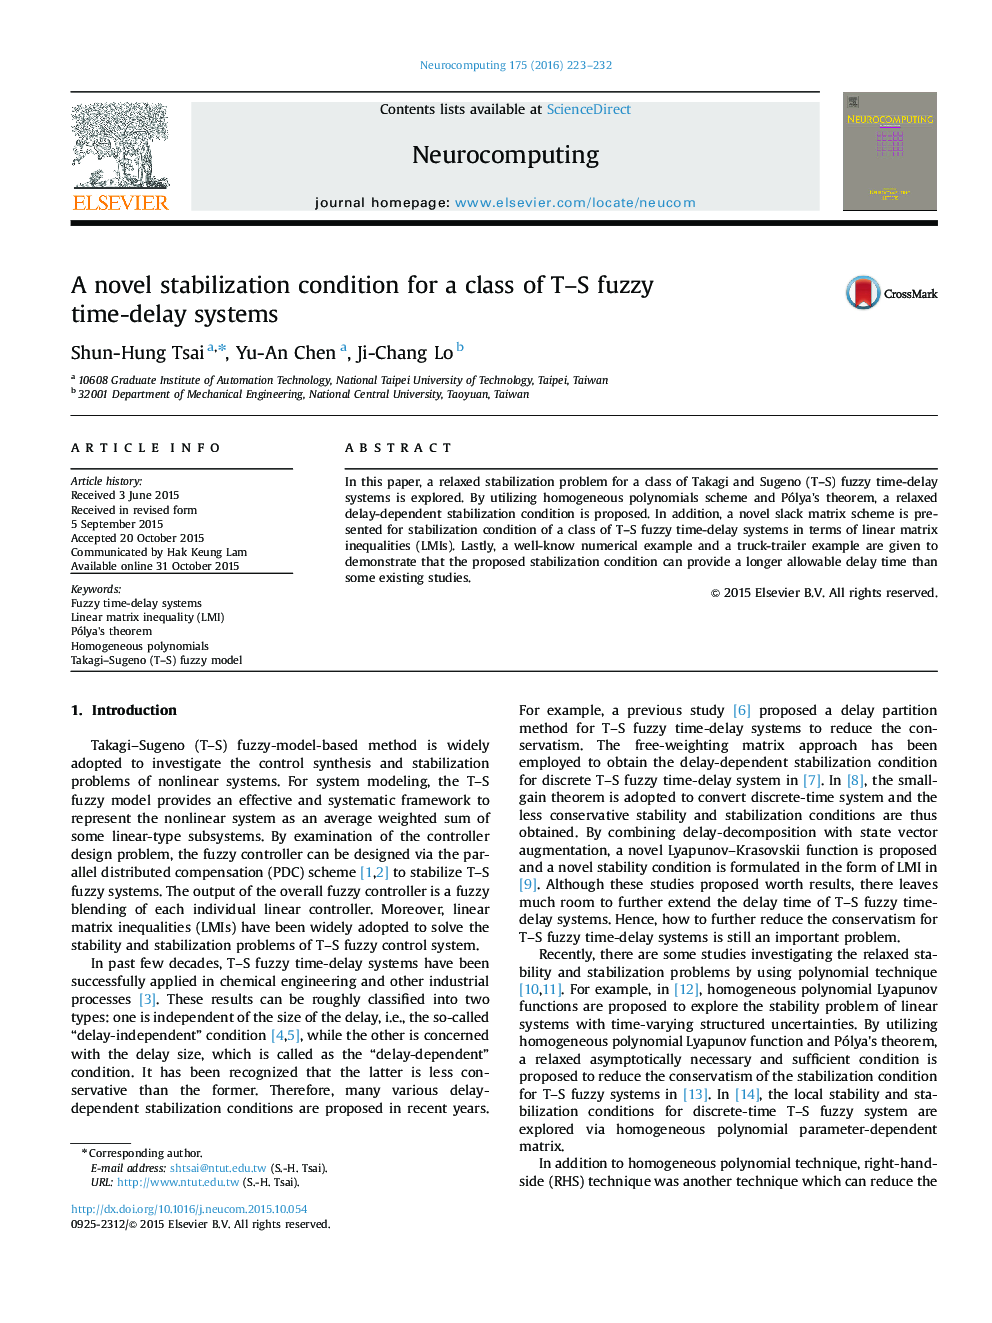 A novel stabilization condition for a class of T–S fuzzy time-delay systems